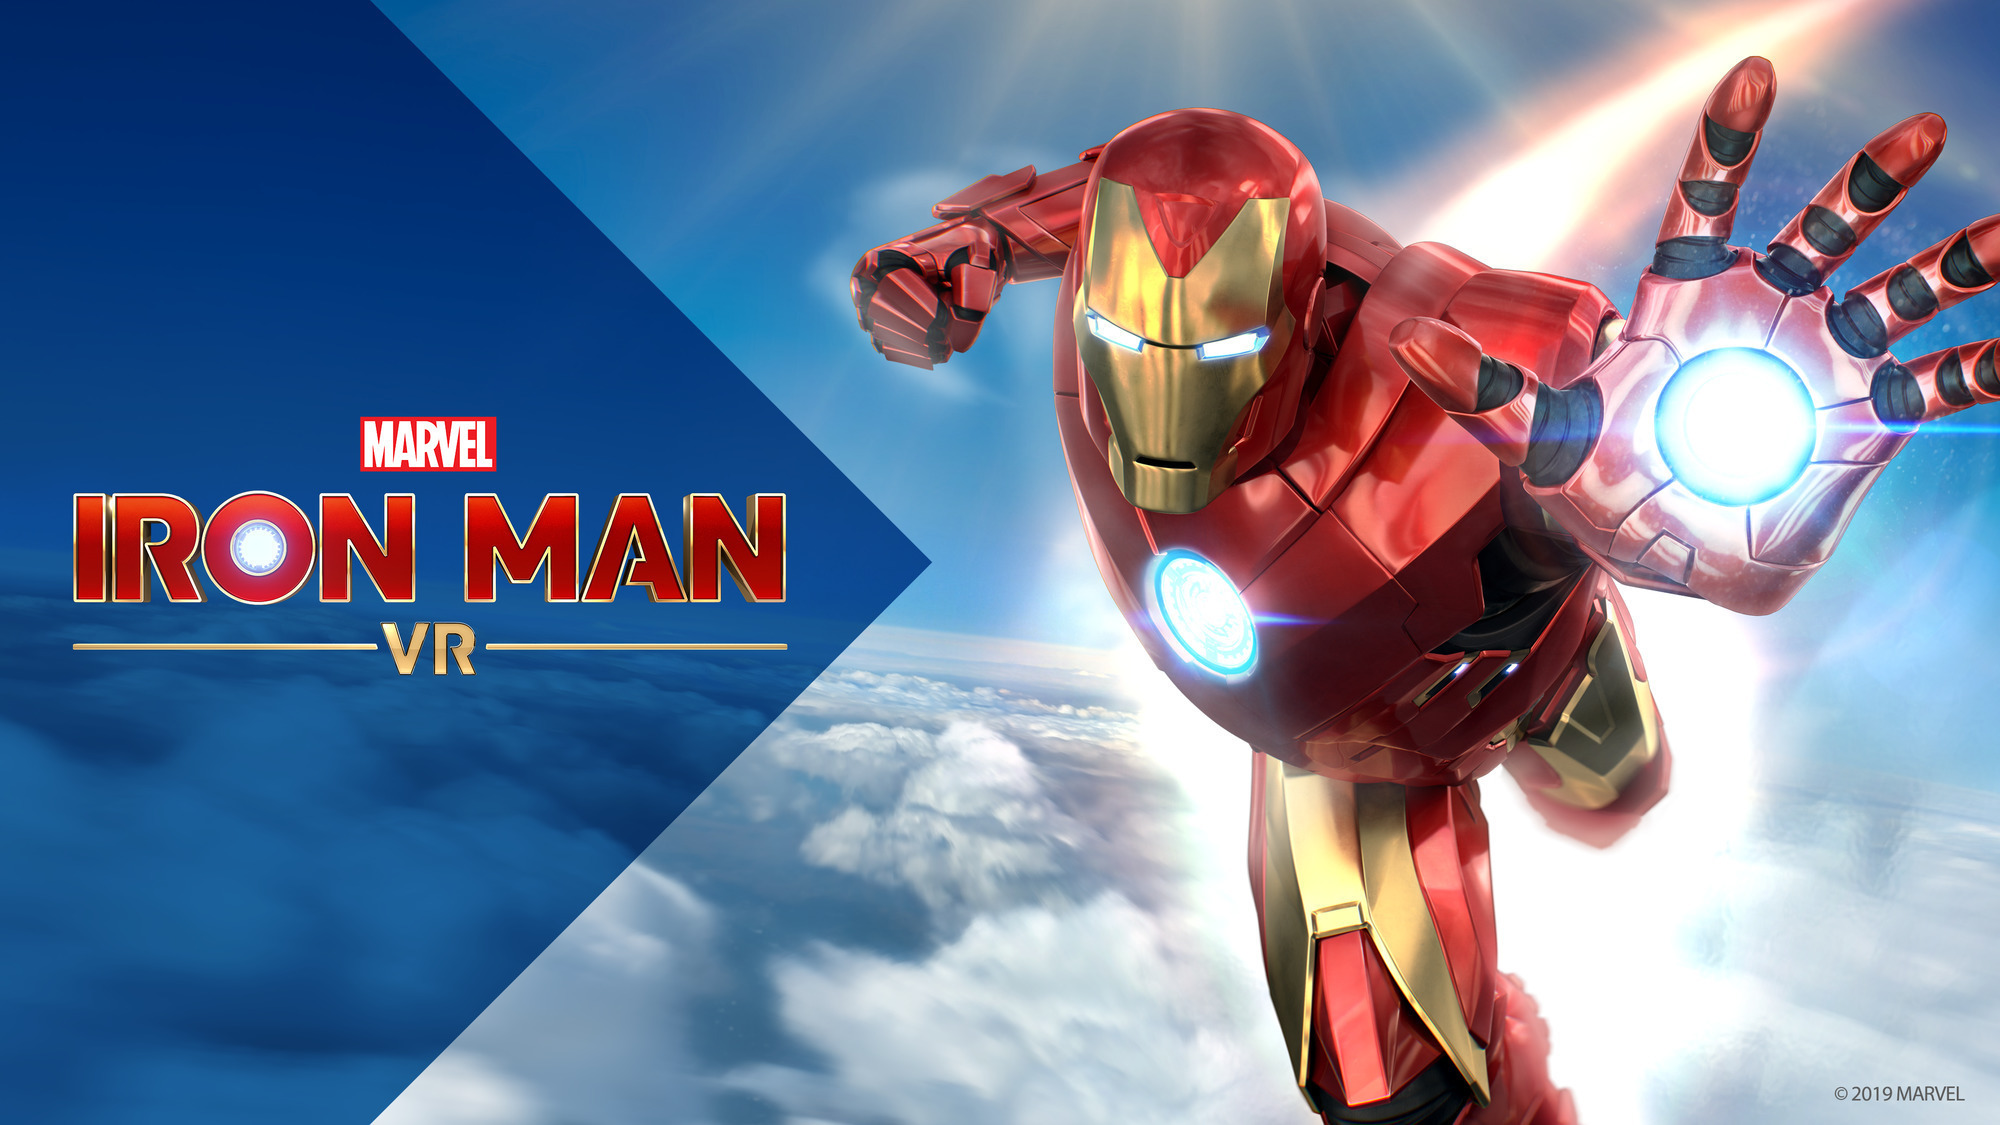 Iron Man VR arrives in July